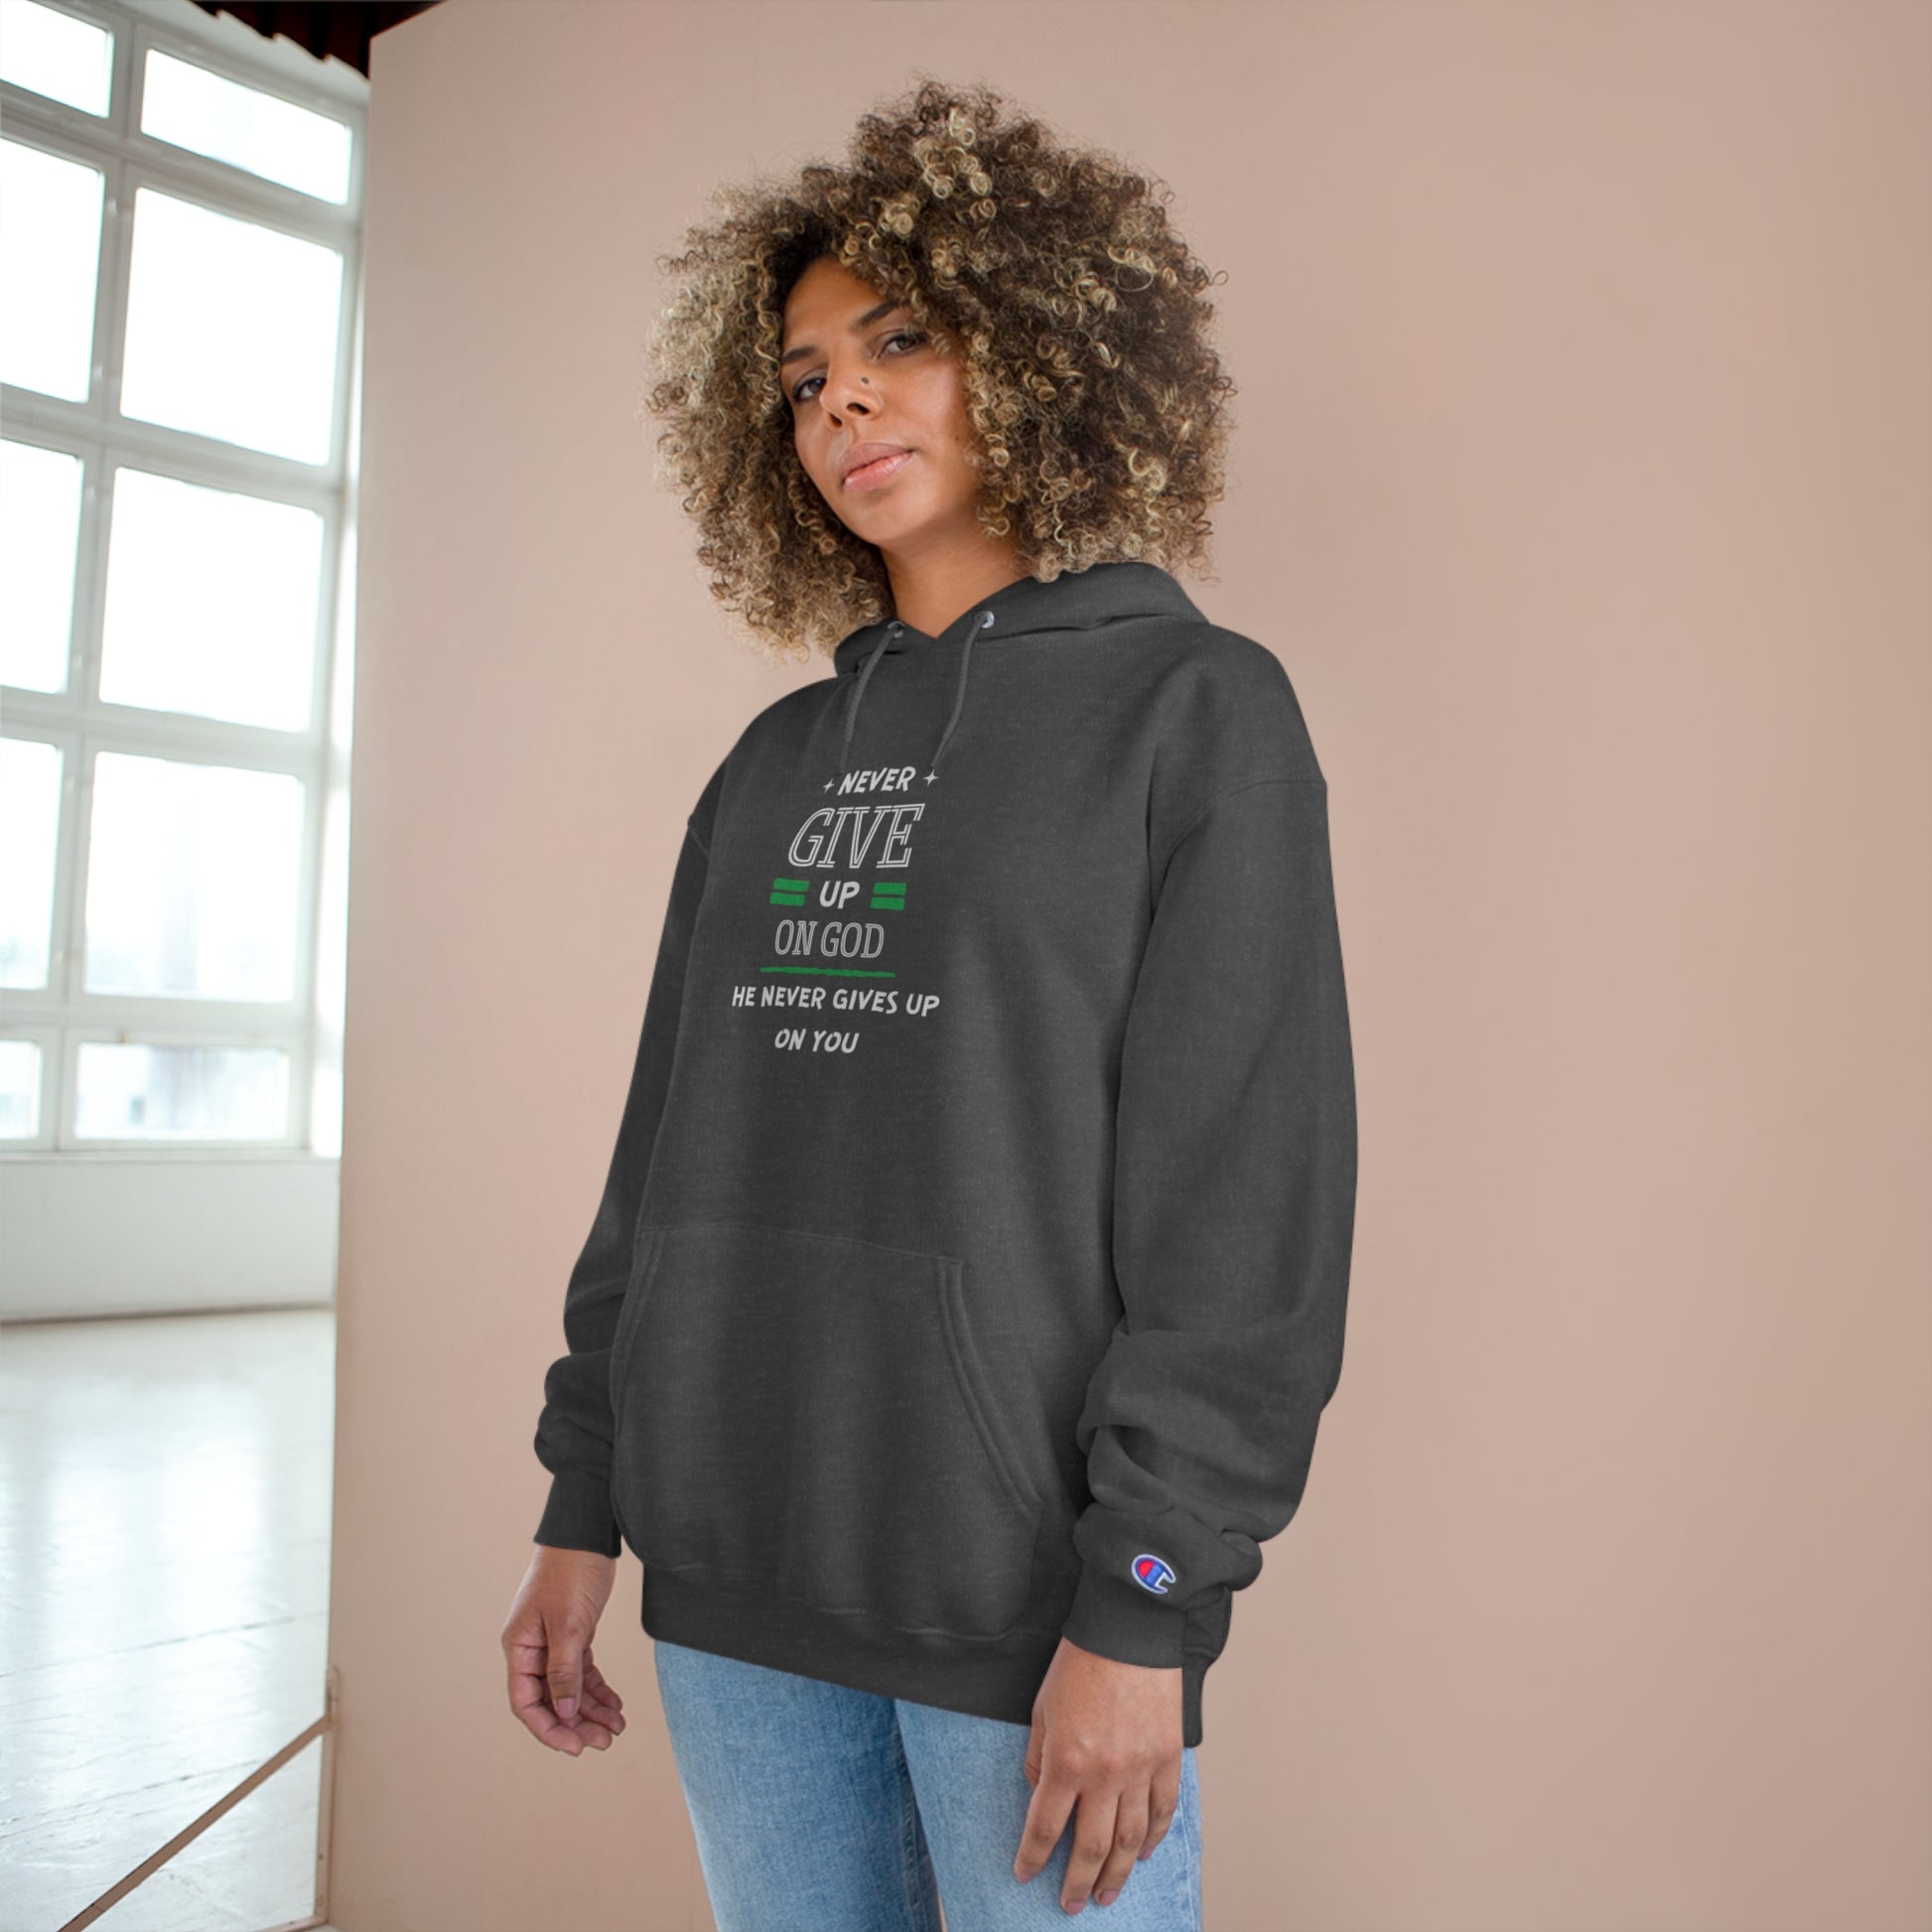 Never Give Up On God He Never Gives Up On You Unisex Champion Hoodie Printify